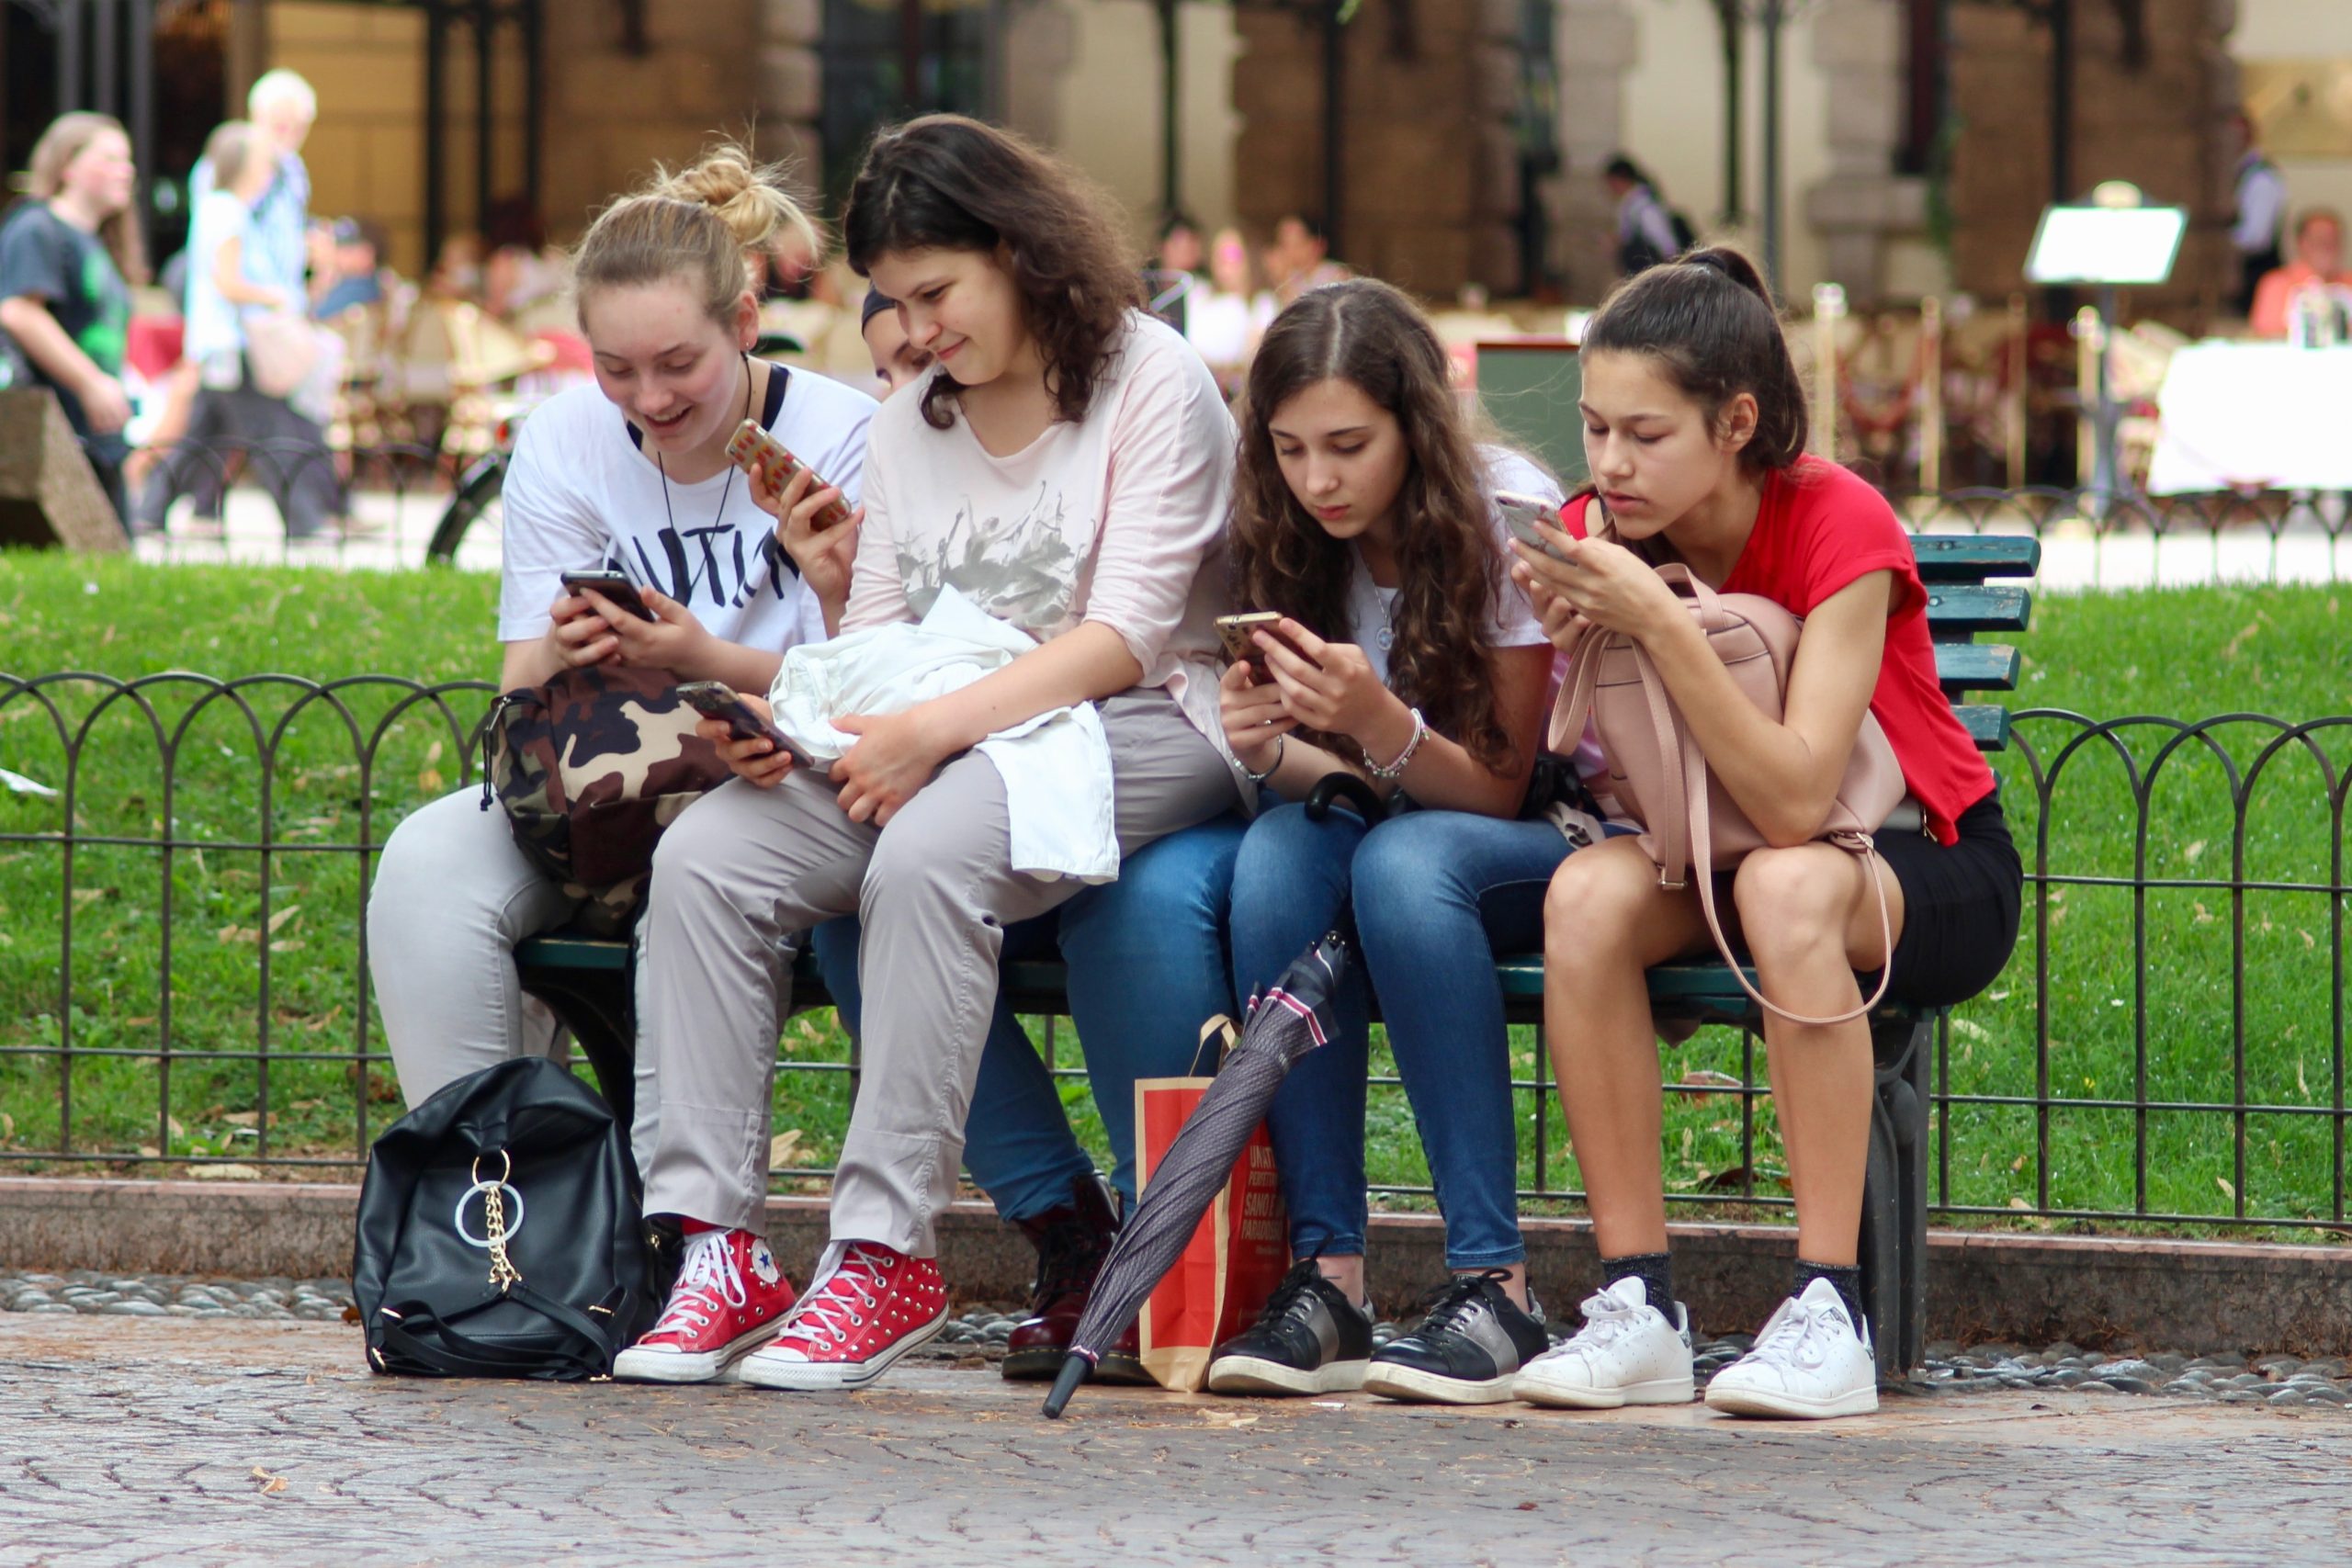 Students sitting on bench each using a cell phone